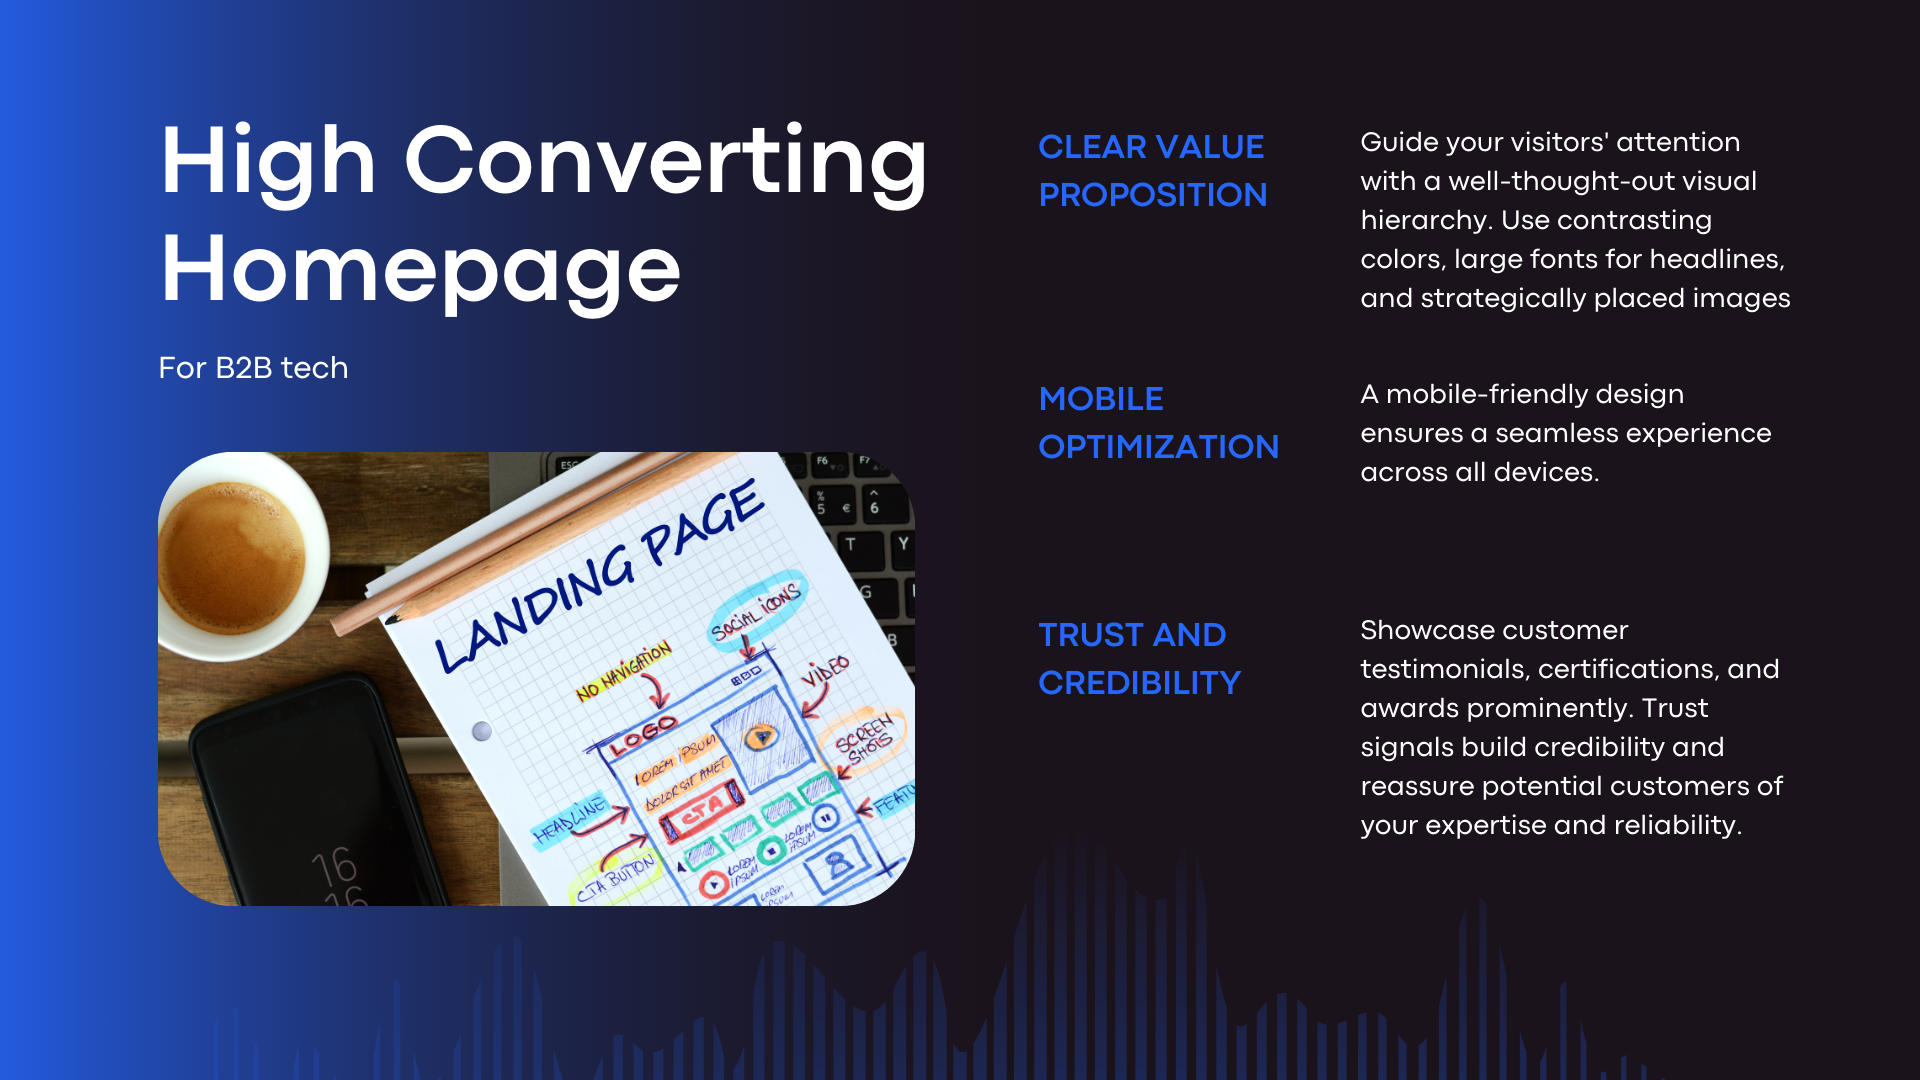 this picture shows how to create a high converting home page for b2b tech